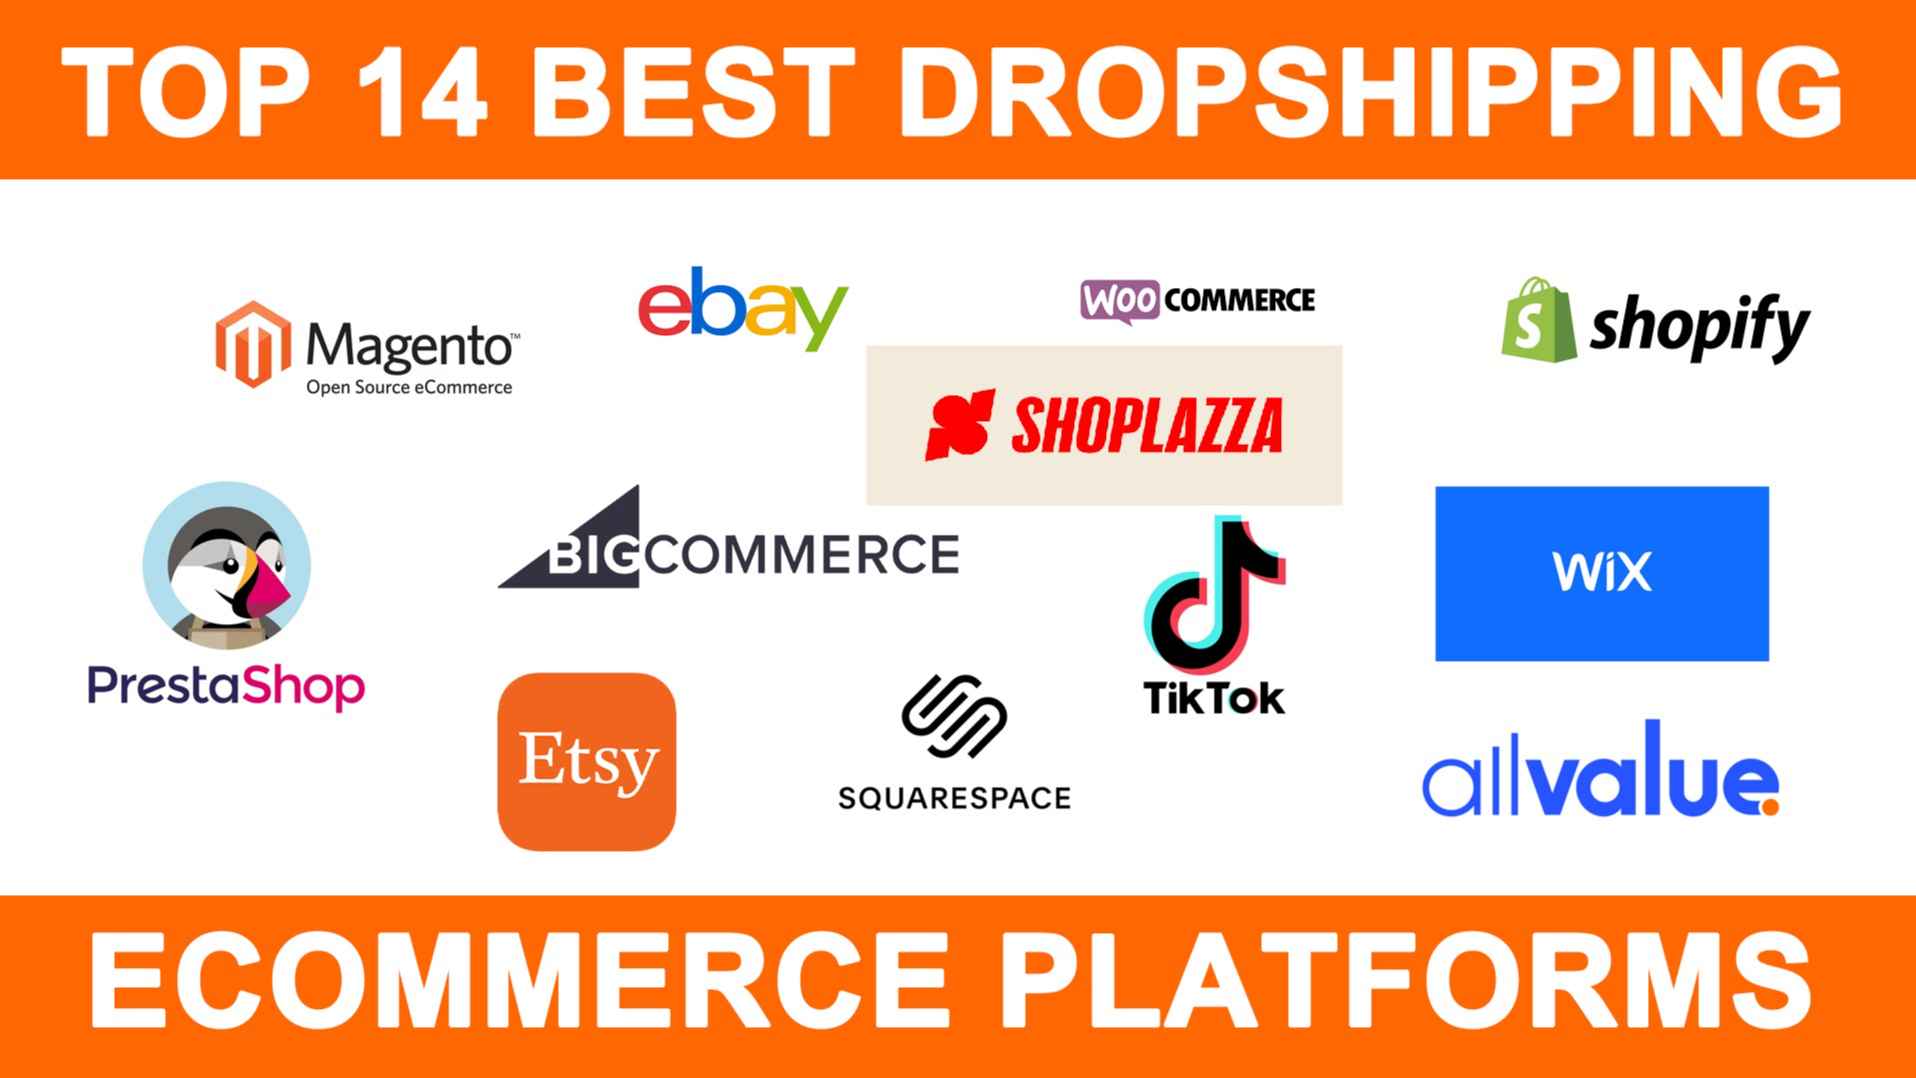 Top 16 Best Dropshipping Ecommerce Platforms 2022